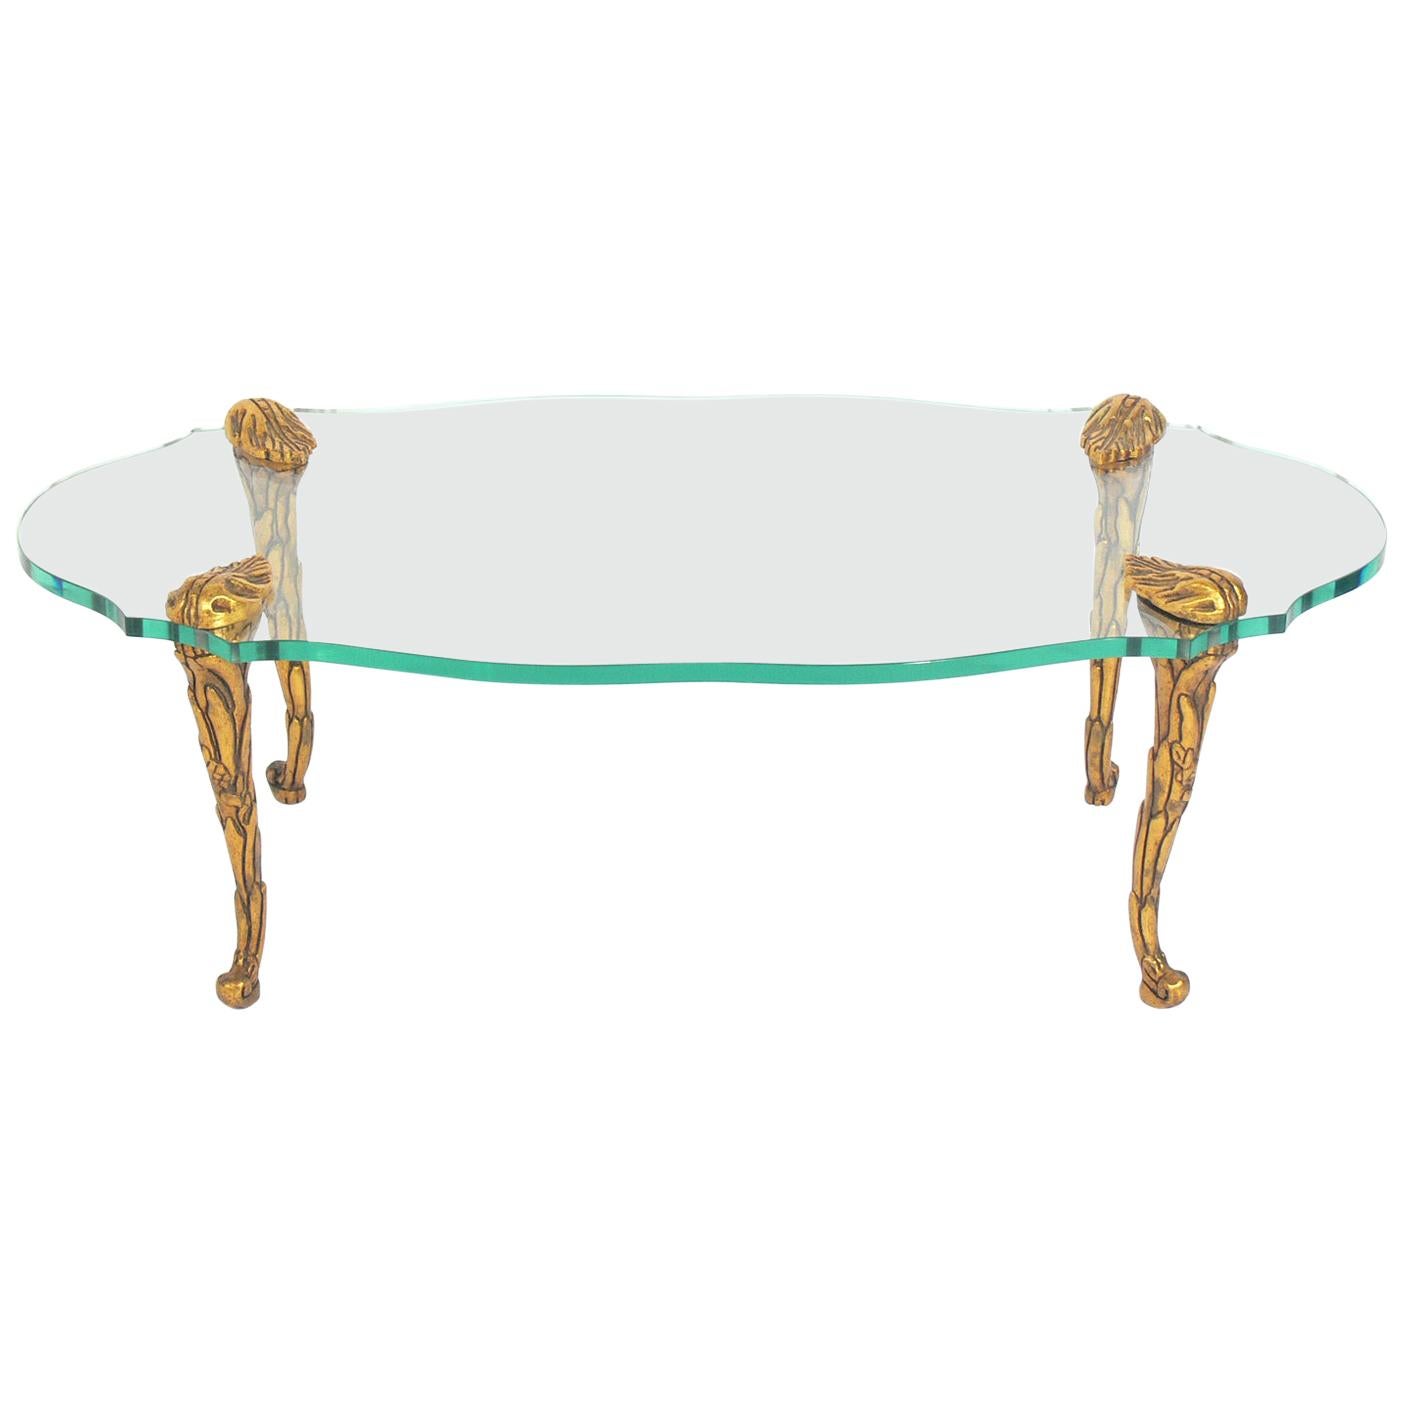 Elegant Giltwood and Glass Coffee Table